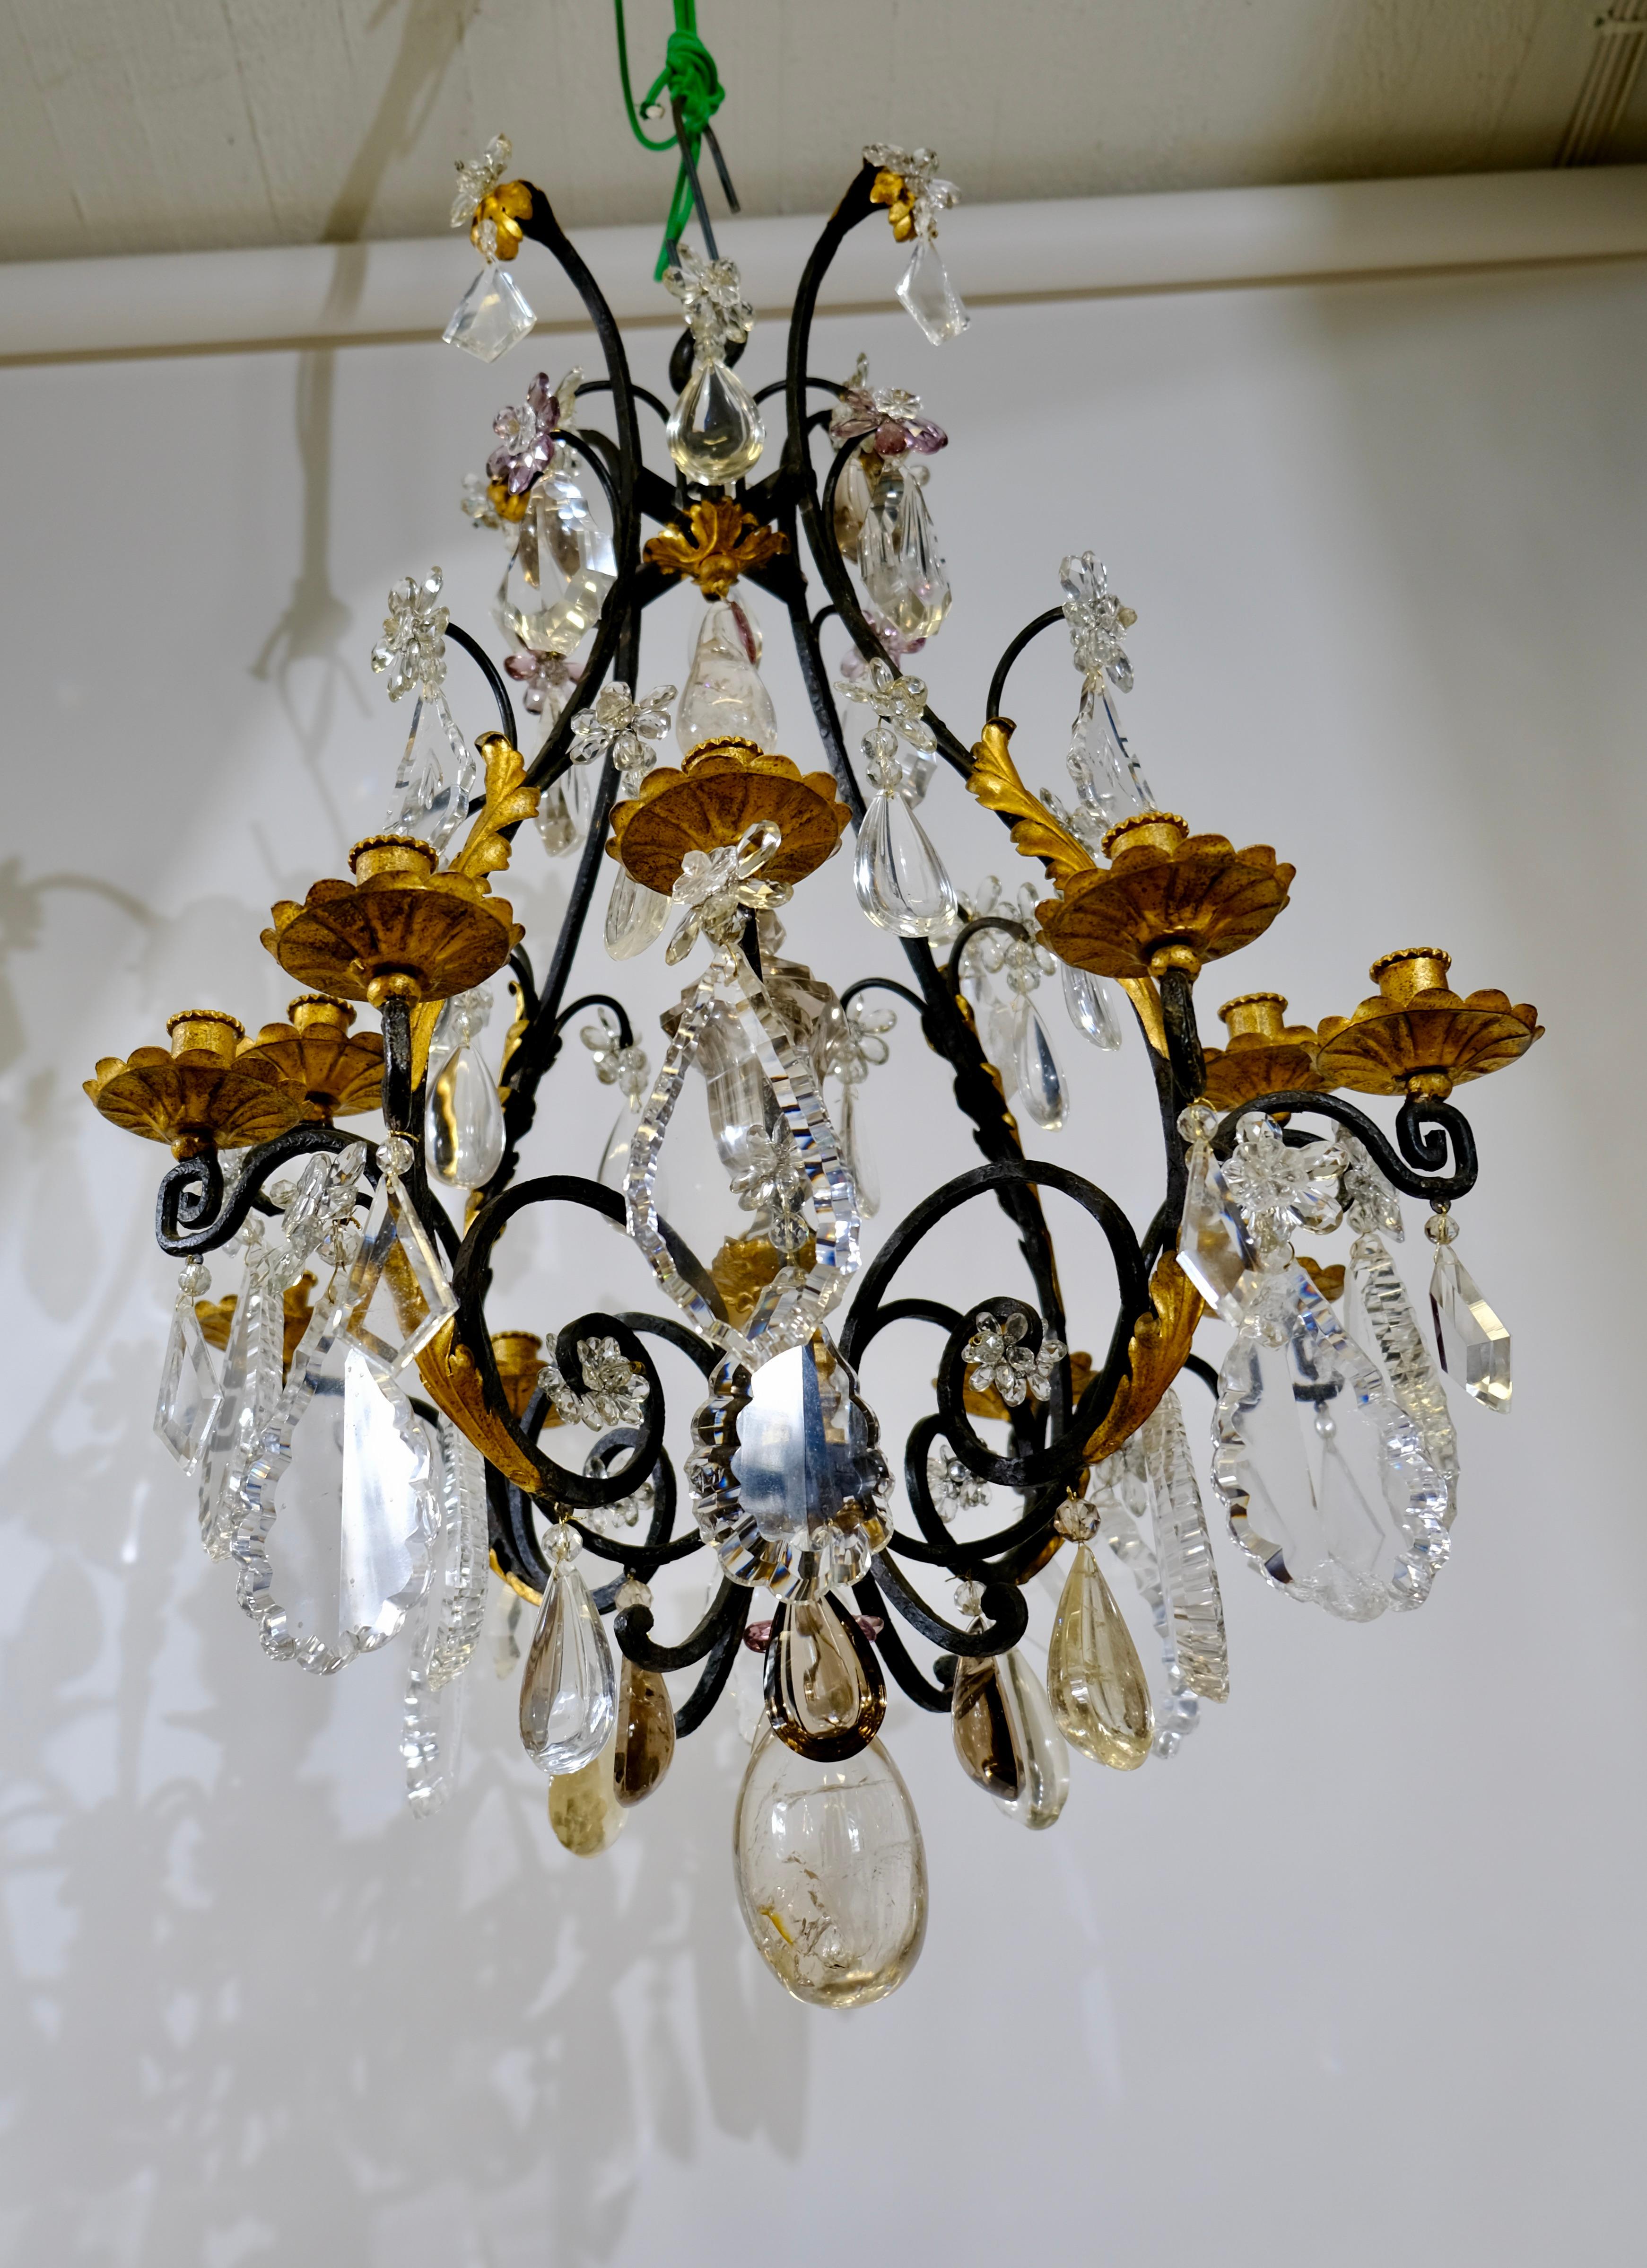 Forged 19th Century Antique Rock Crystal Chandelier